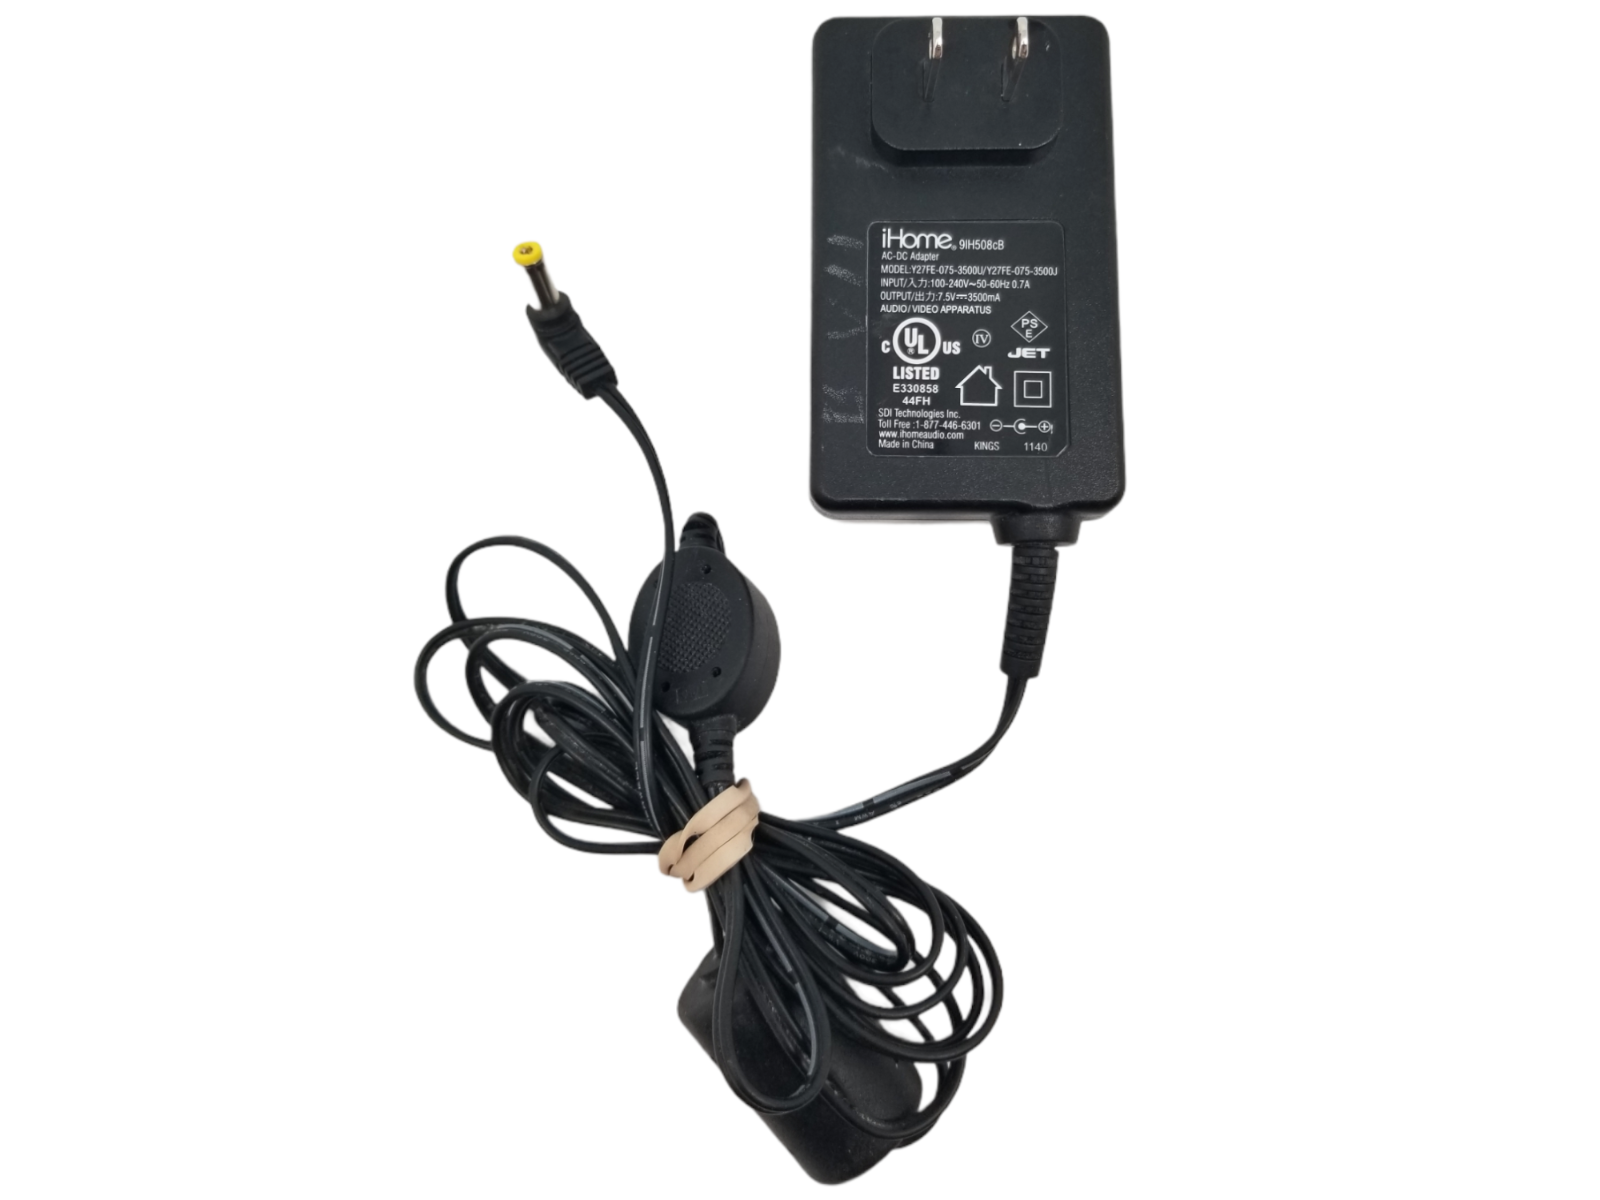 iHome Power Cord AC-DC Adapter 9lH533cB Model Y27FE-075-3500U Audio/Video Compatible Brand: ihome Type: AC/DC Adapte